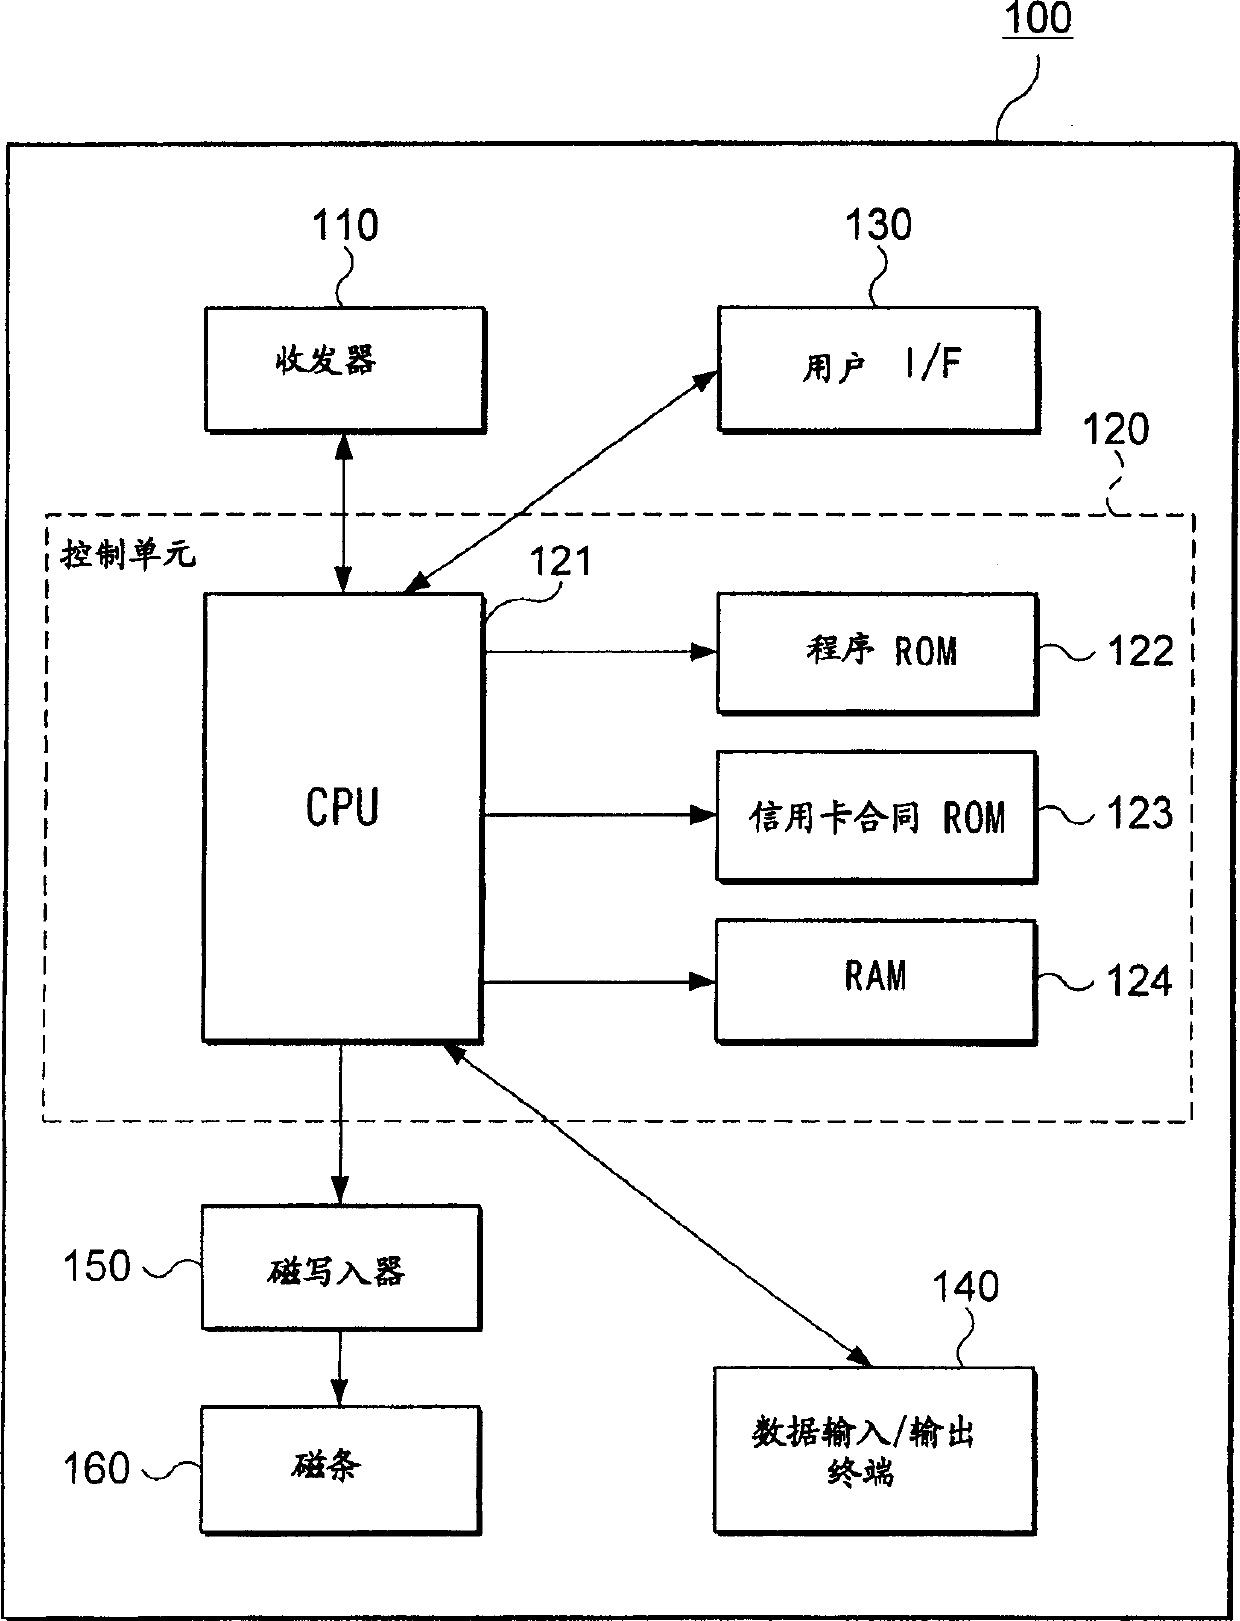 Electronic business contract adjusting method and mobile communication network